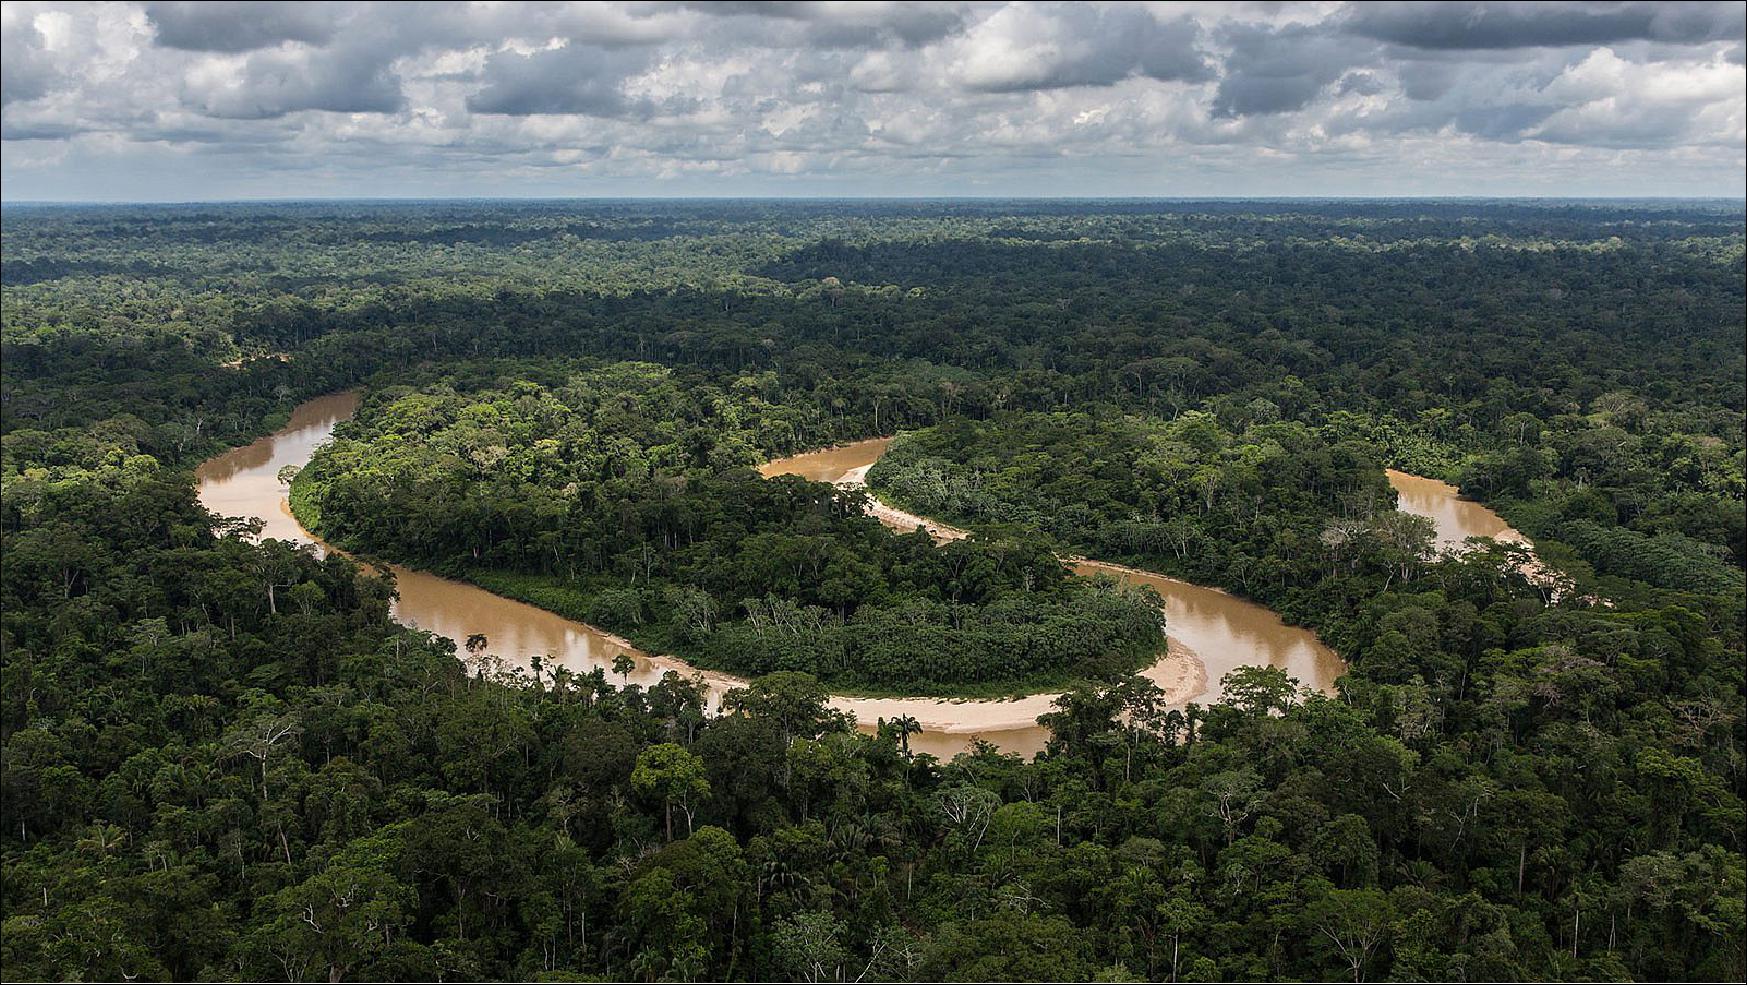 Figure 28: The Amazon rainforest is often called "the lungs of the world." It produces oxygen and stores billions of tons of carbon every year (image credit: USDA Forest Service photo by Diego Perez)